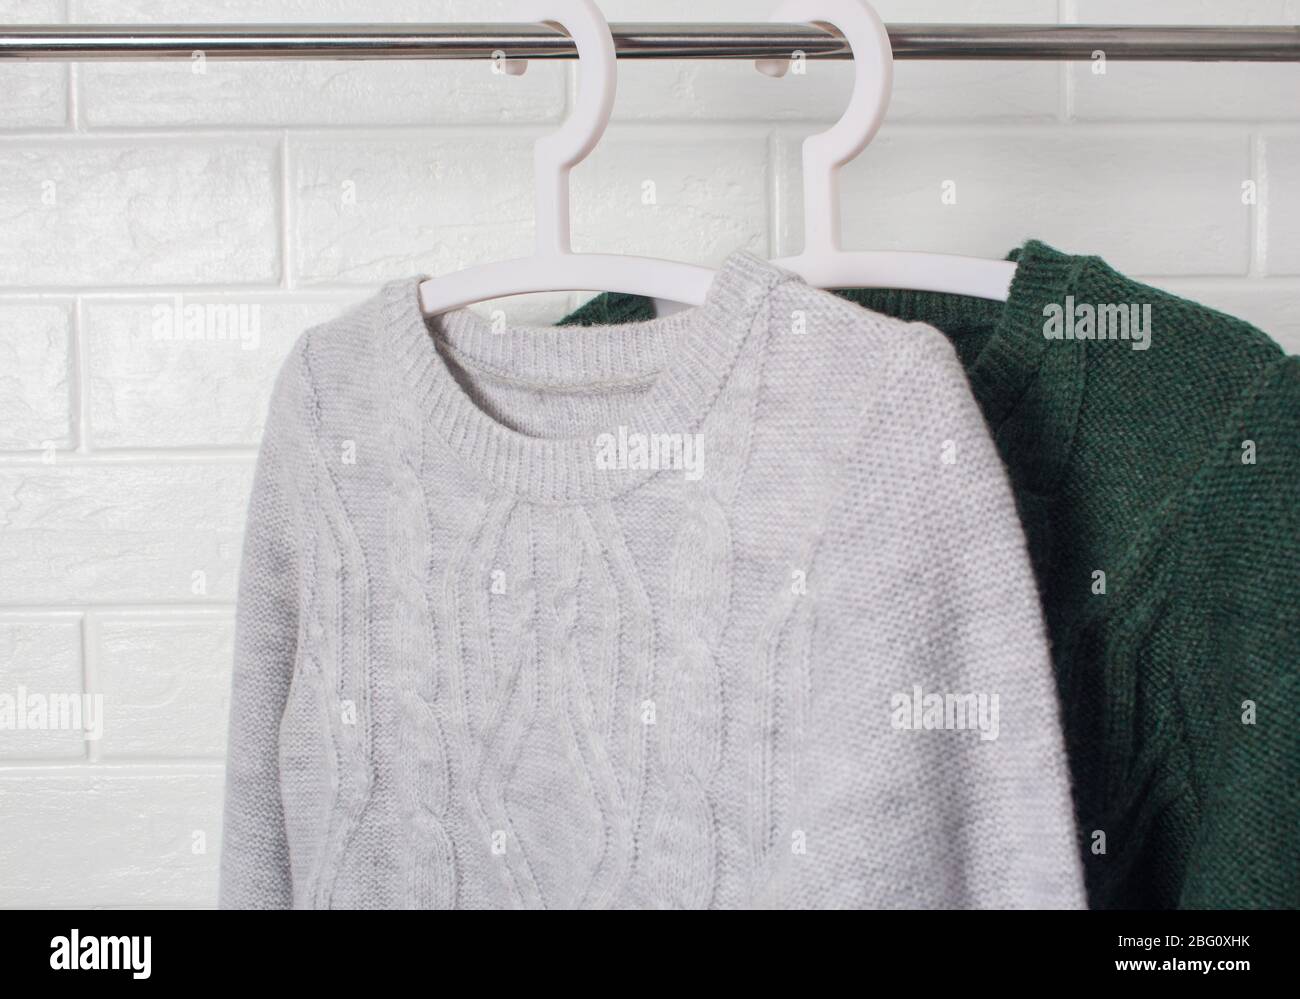 Clothes hang on hangers. Sweaters green and melange colors. Fashion and style, showcase, store, concept. White brick wall, comfort and cleaning, wool. Stock Photo